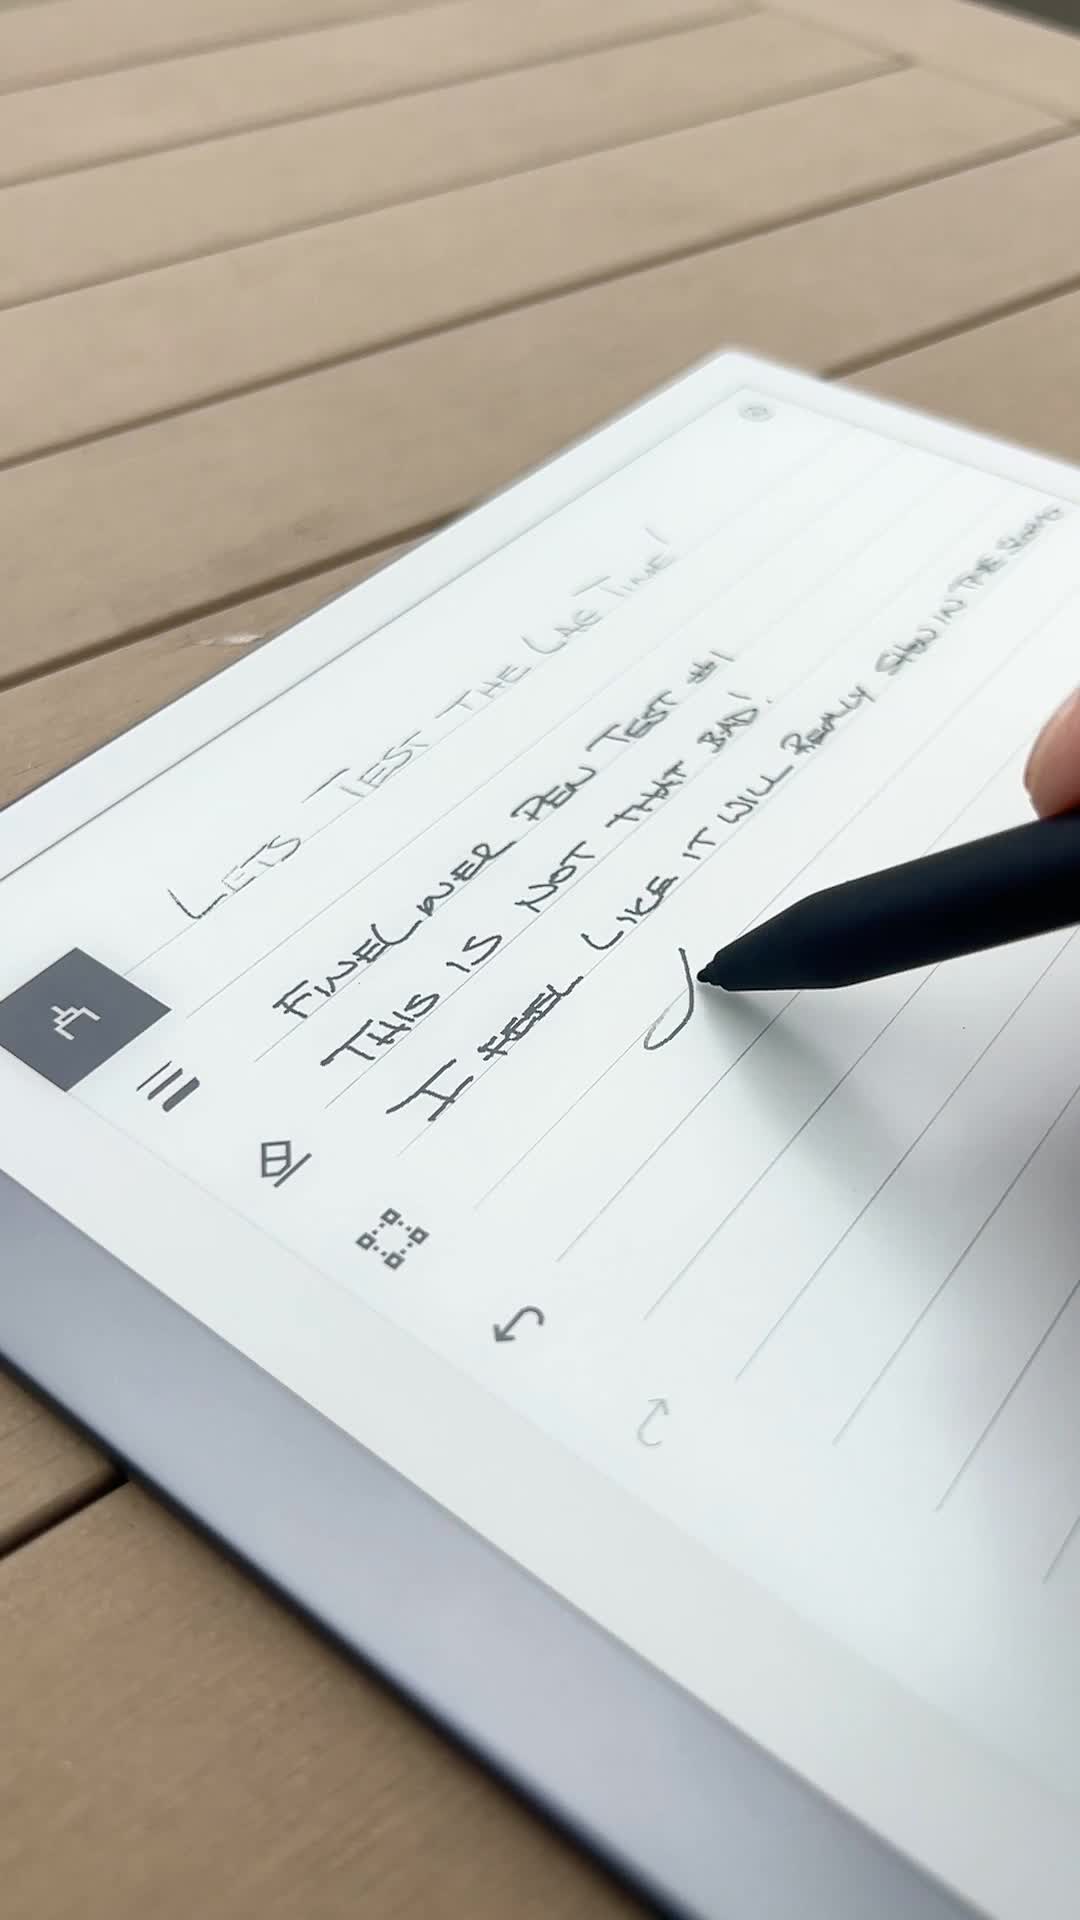 reMarkable 2 review: The first tablet that actually writes like paper